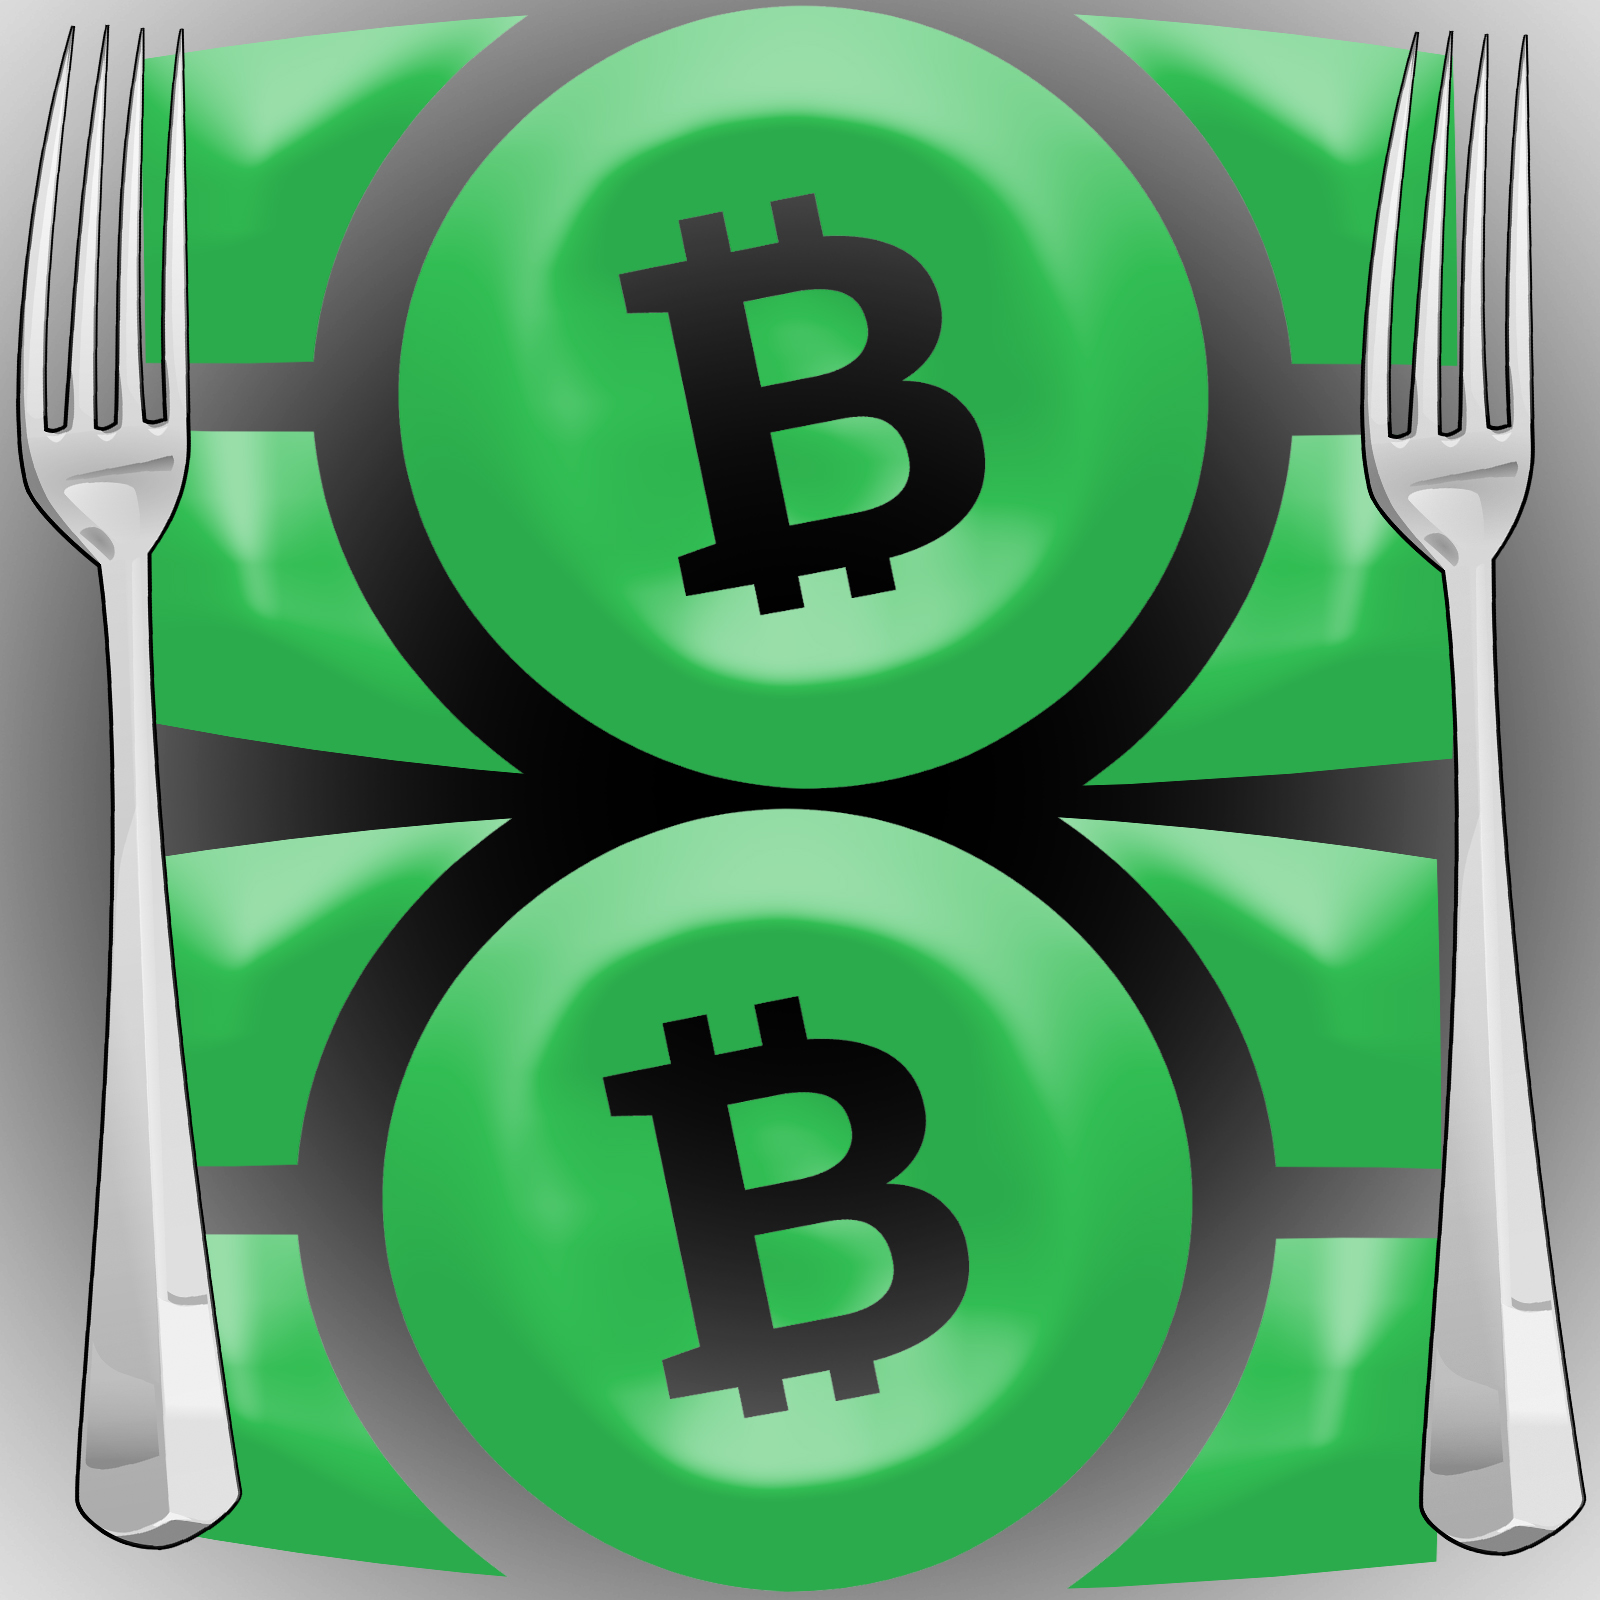 Preparing for the Impending Bitcoin Cash Fork